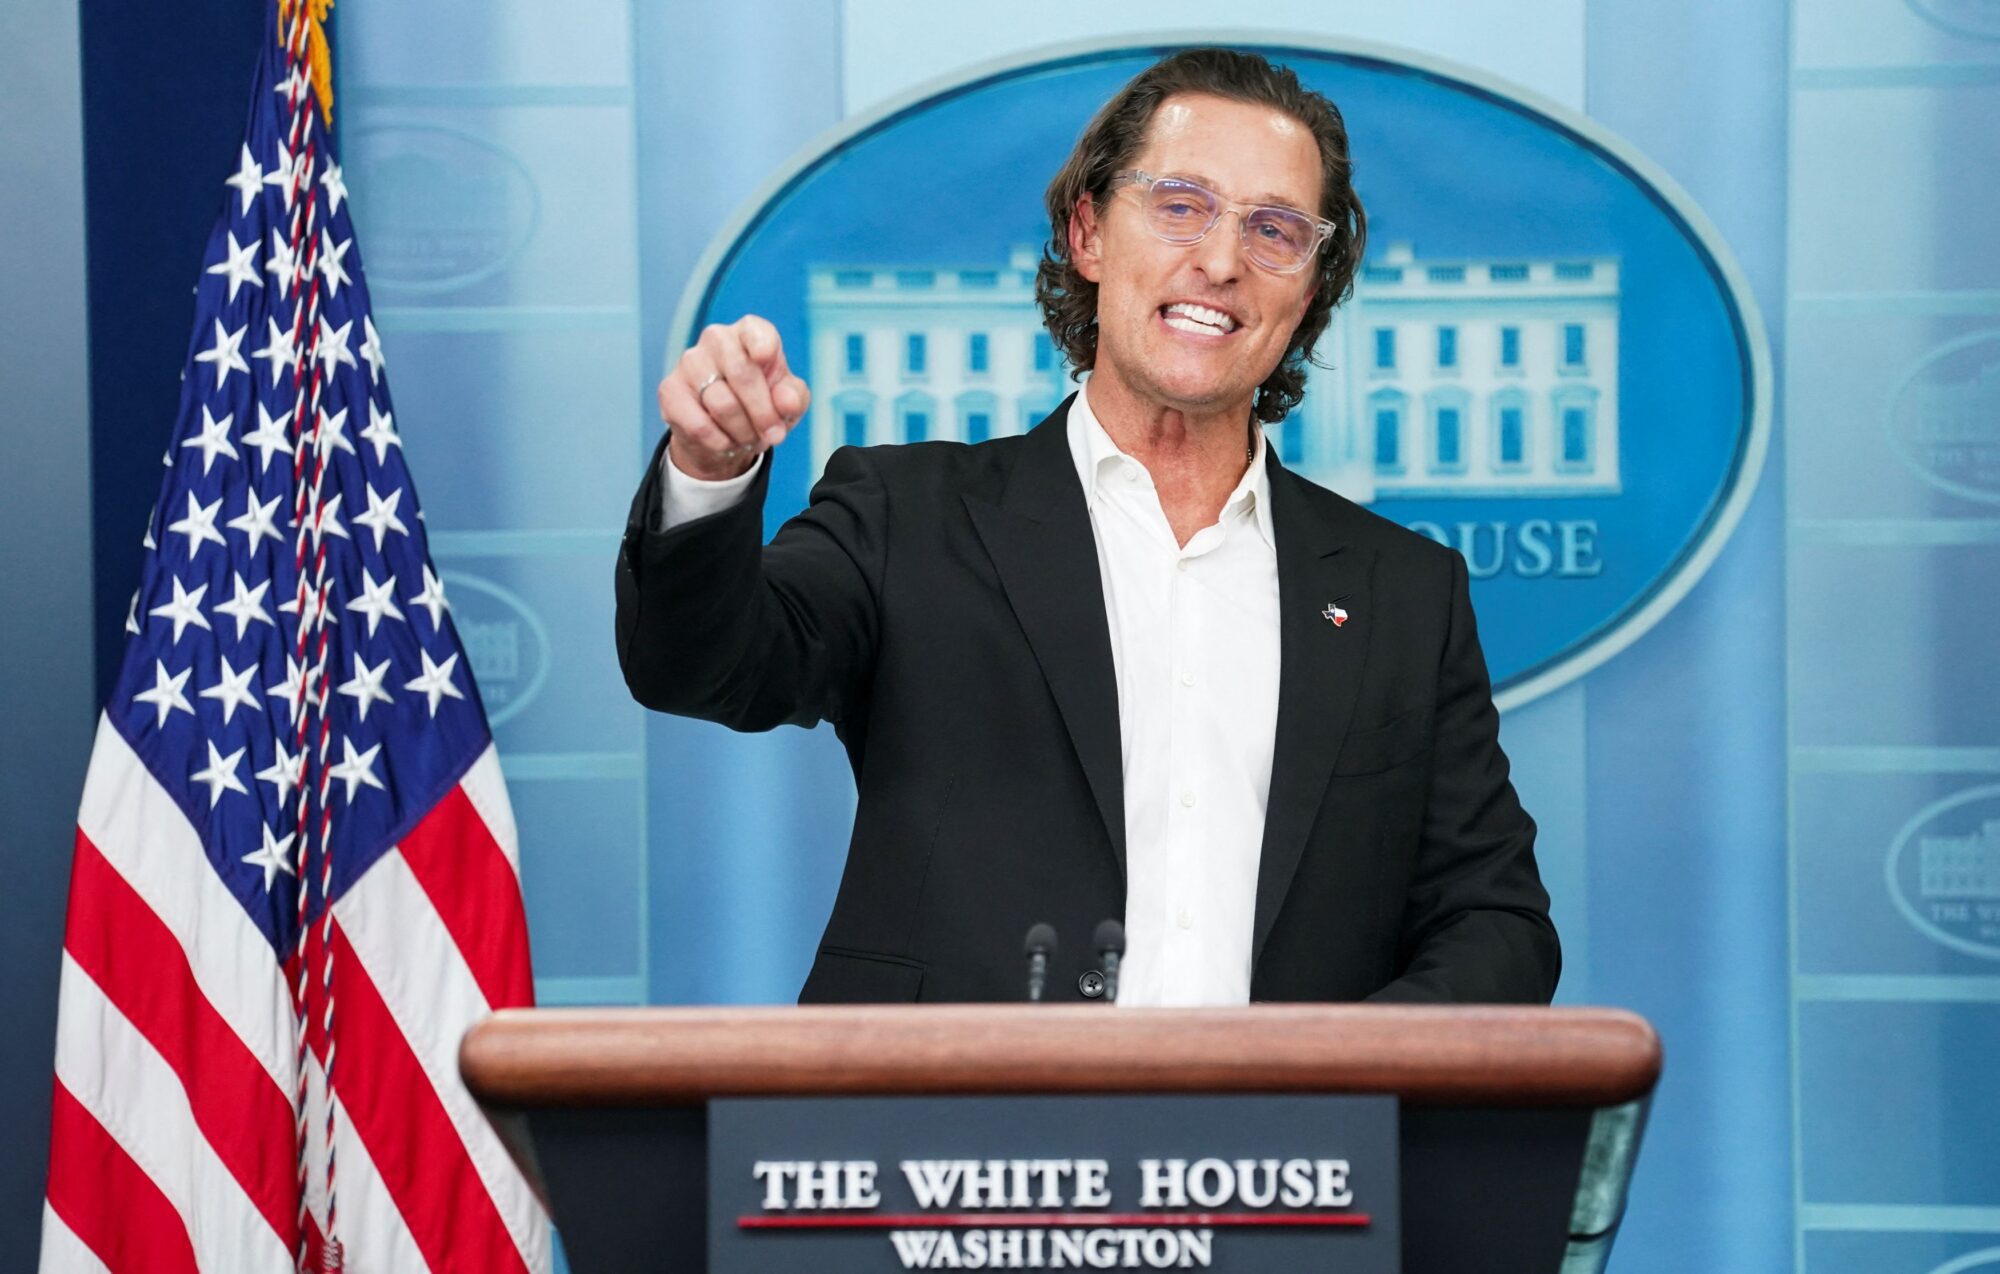 Actor Matthew McConaughey, a native of Uvalde, Texas as well as a father and a gun owner, speaks to reporters about the recent mass shooting at an elementary school in Uvalde during a press briefing at the White House in Washington, U.S., June 7, 2022. REUTERS/Kevin Lamarque